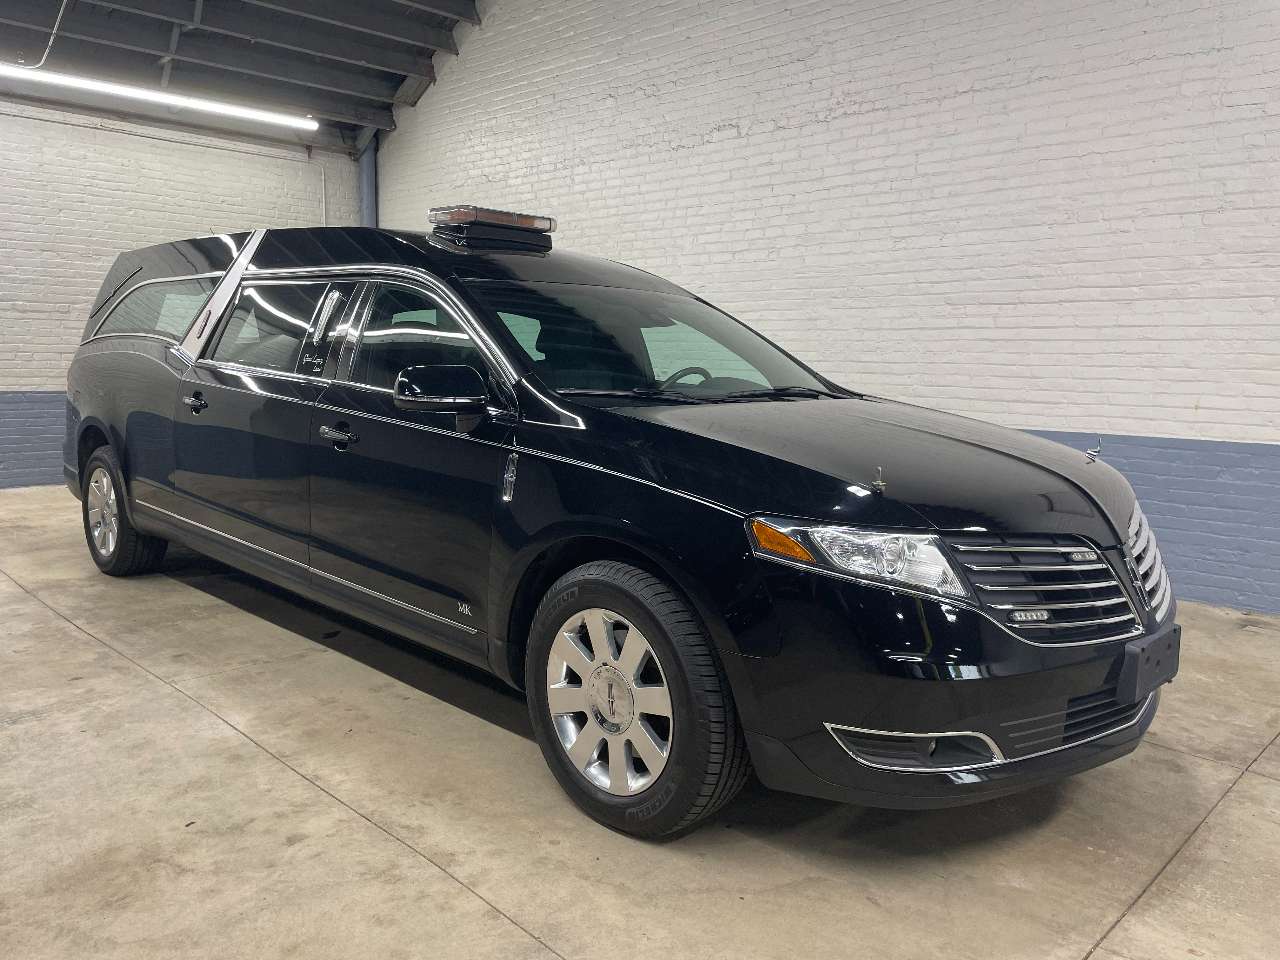 2017 Lincoln MK Grand Legacy Limited Hearse 1663948680243